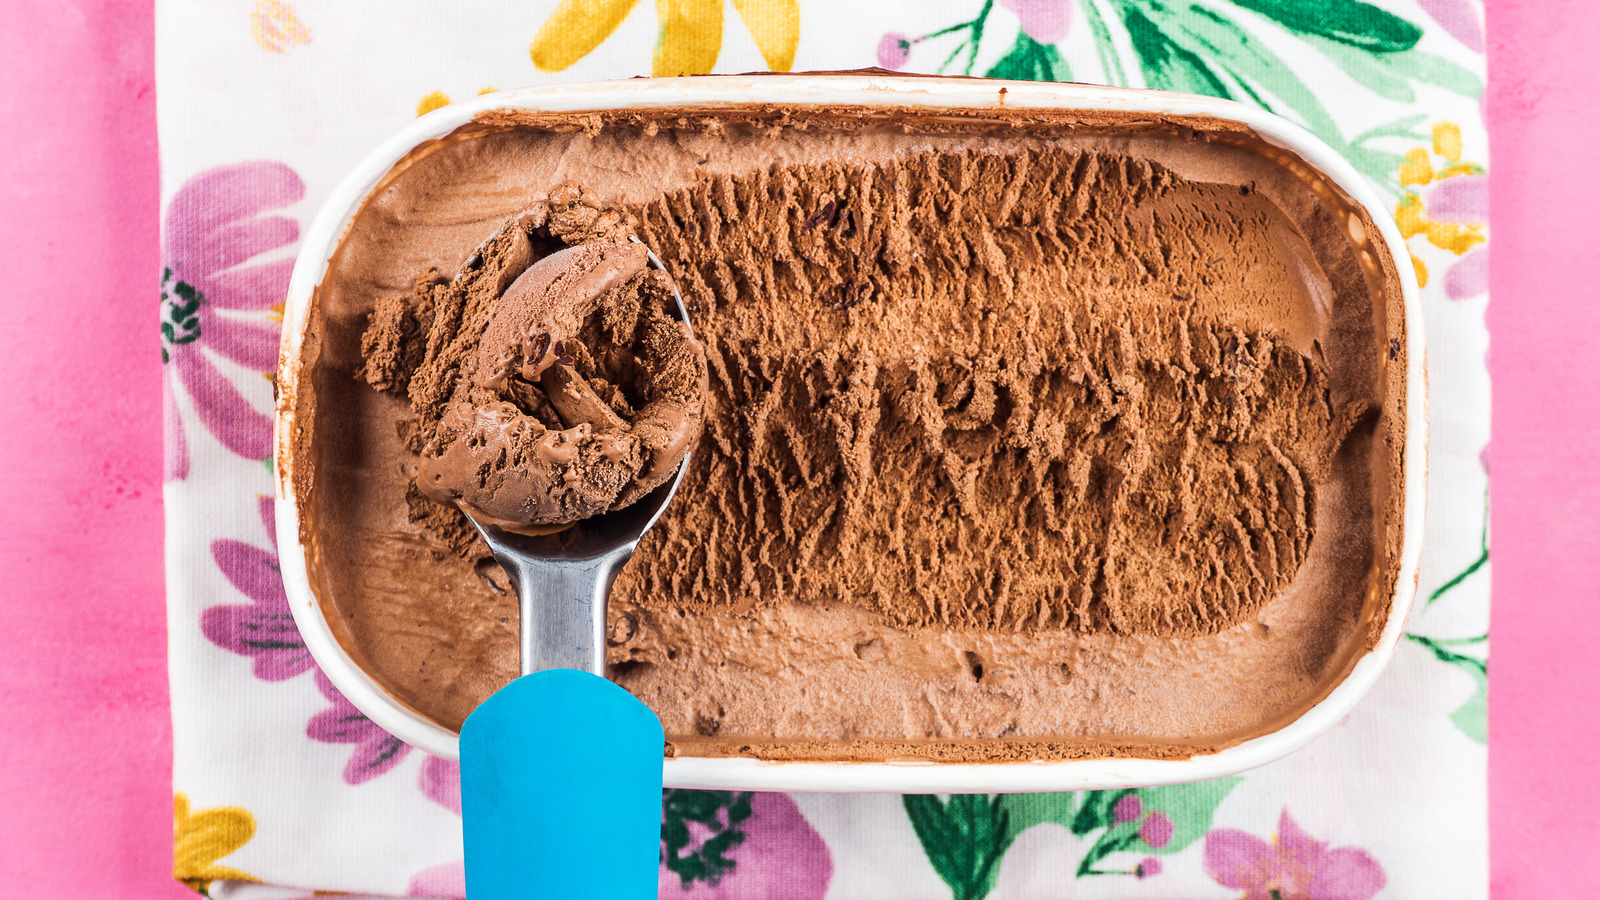 https://www.thedailymeal.com/img/gallery/the-trick-you-need-to-use-to-store-ice-cream/l-intro-1663774802.jpg